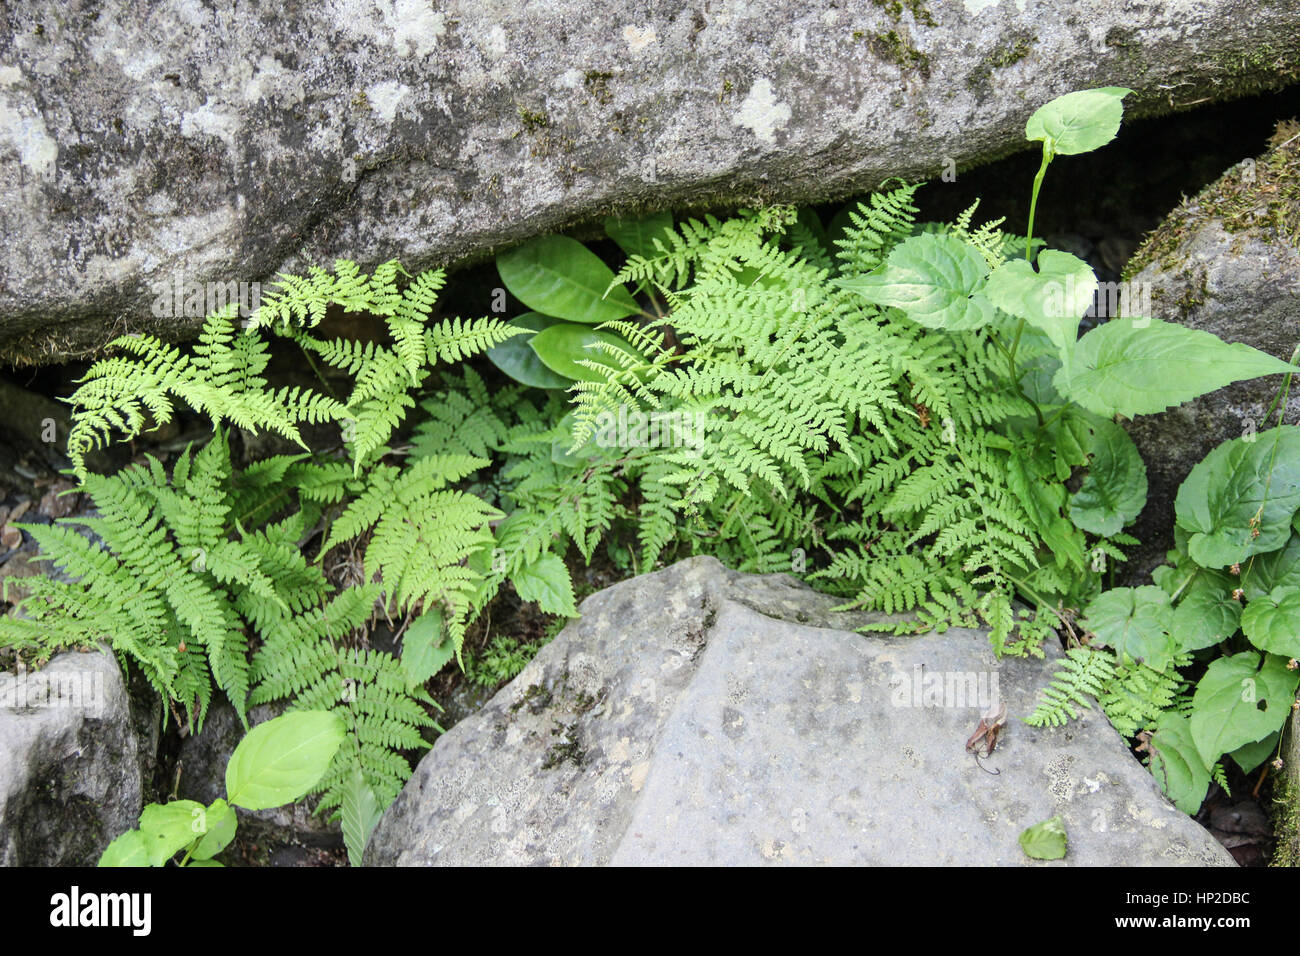 Plants and ferns growing between rocks in Smoky Mountains National Park in Tennessee Stock Photo